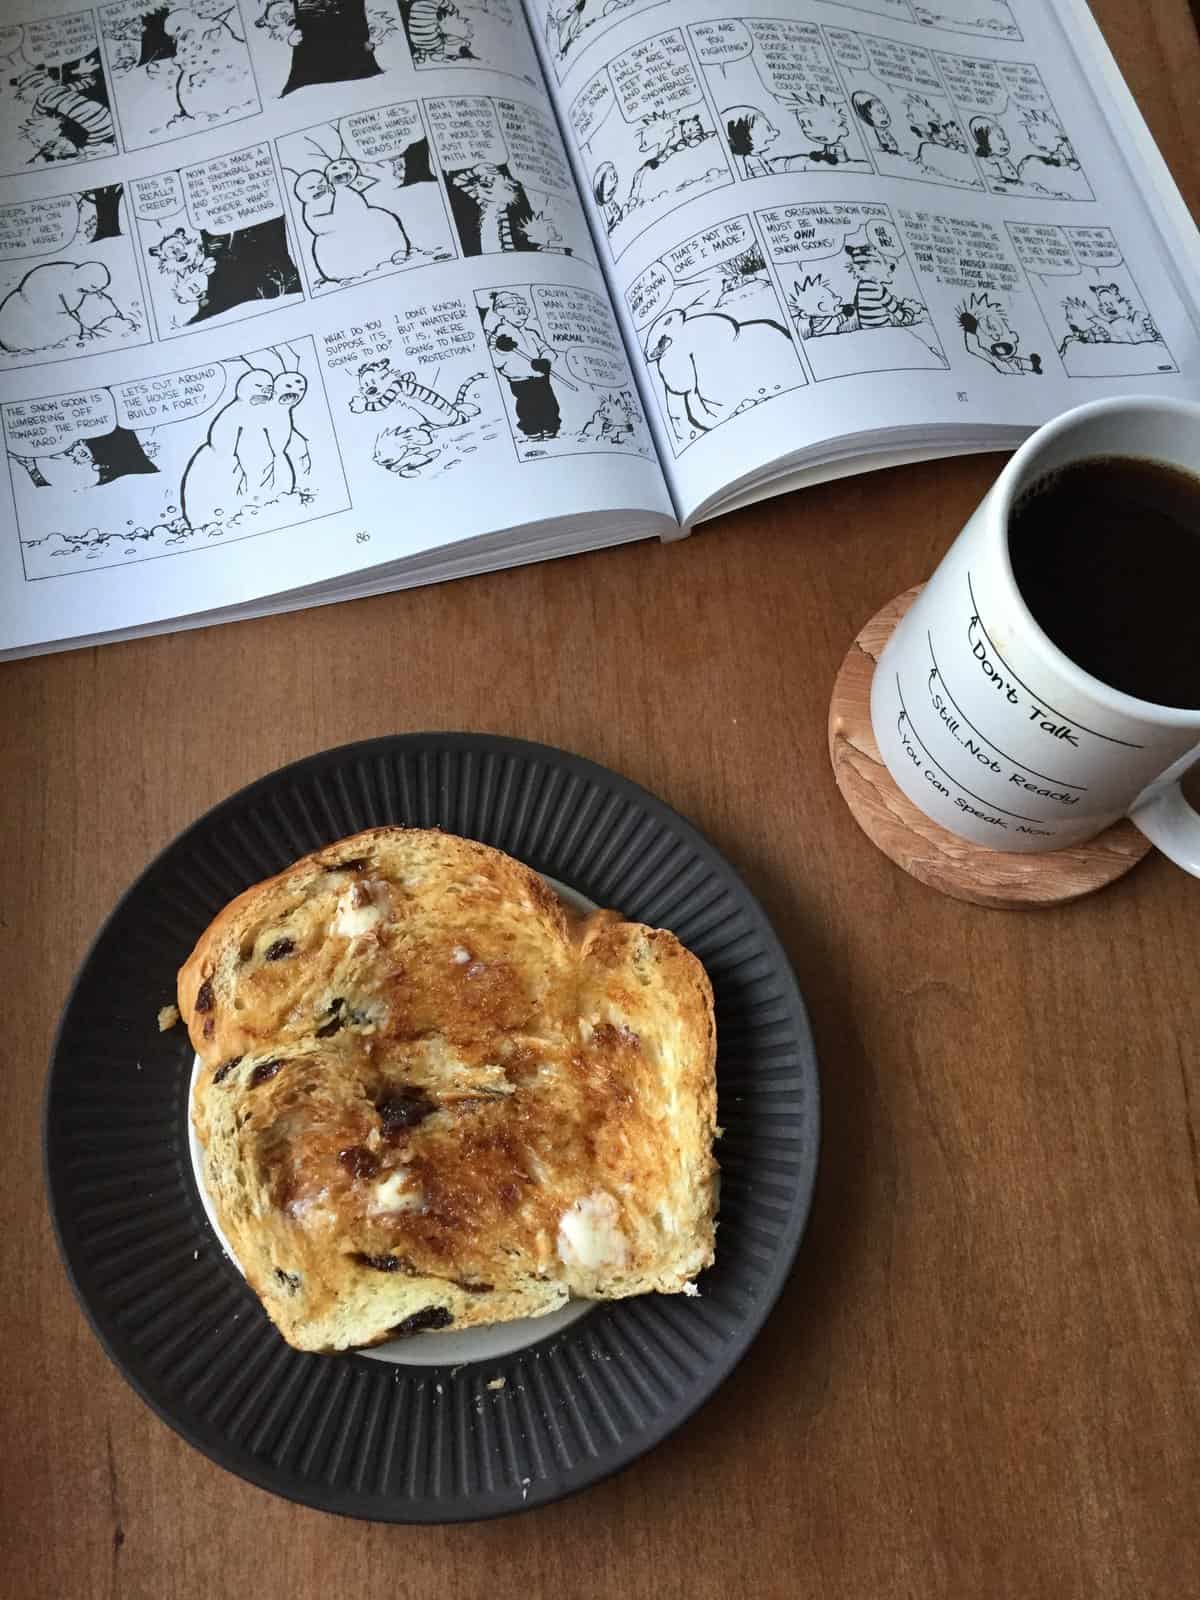 a slice of toasted raisin challah on a plate with coffe cup and comic book.